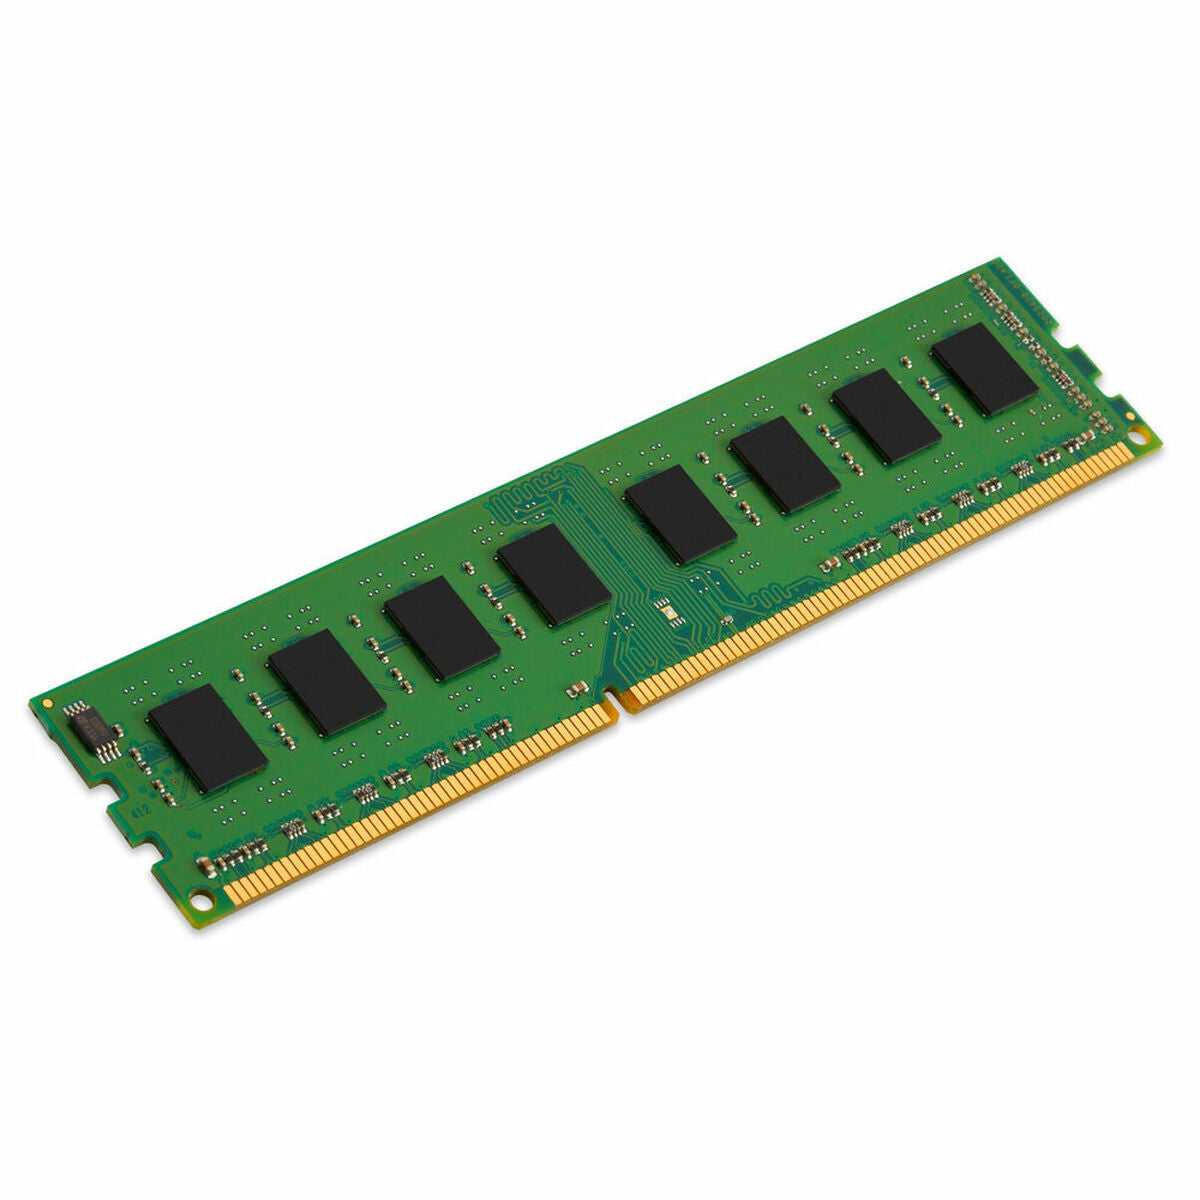 RAM Memory Kingston KCP3L16ND8/8         8 GB DDR3L, Kingston, Computing, Components, ram-memory-kingston-kcp3l16nd8-8-8-gb-ddr3l, Brand_Kingston, category-reference-2609, category-reference-2803, category-reference-2807, category-reference-t-19685, category-reference-t-19912, category-reference-t-21360, computers / components, Condition_NEW, Price_50 - 100, Teleworking, RiotNook